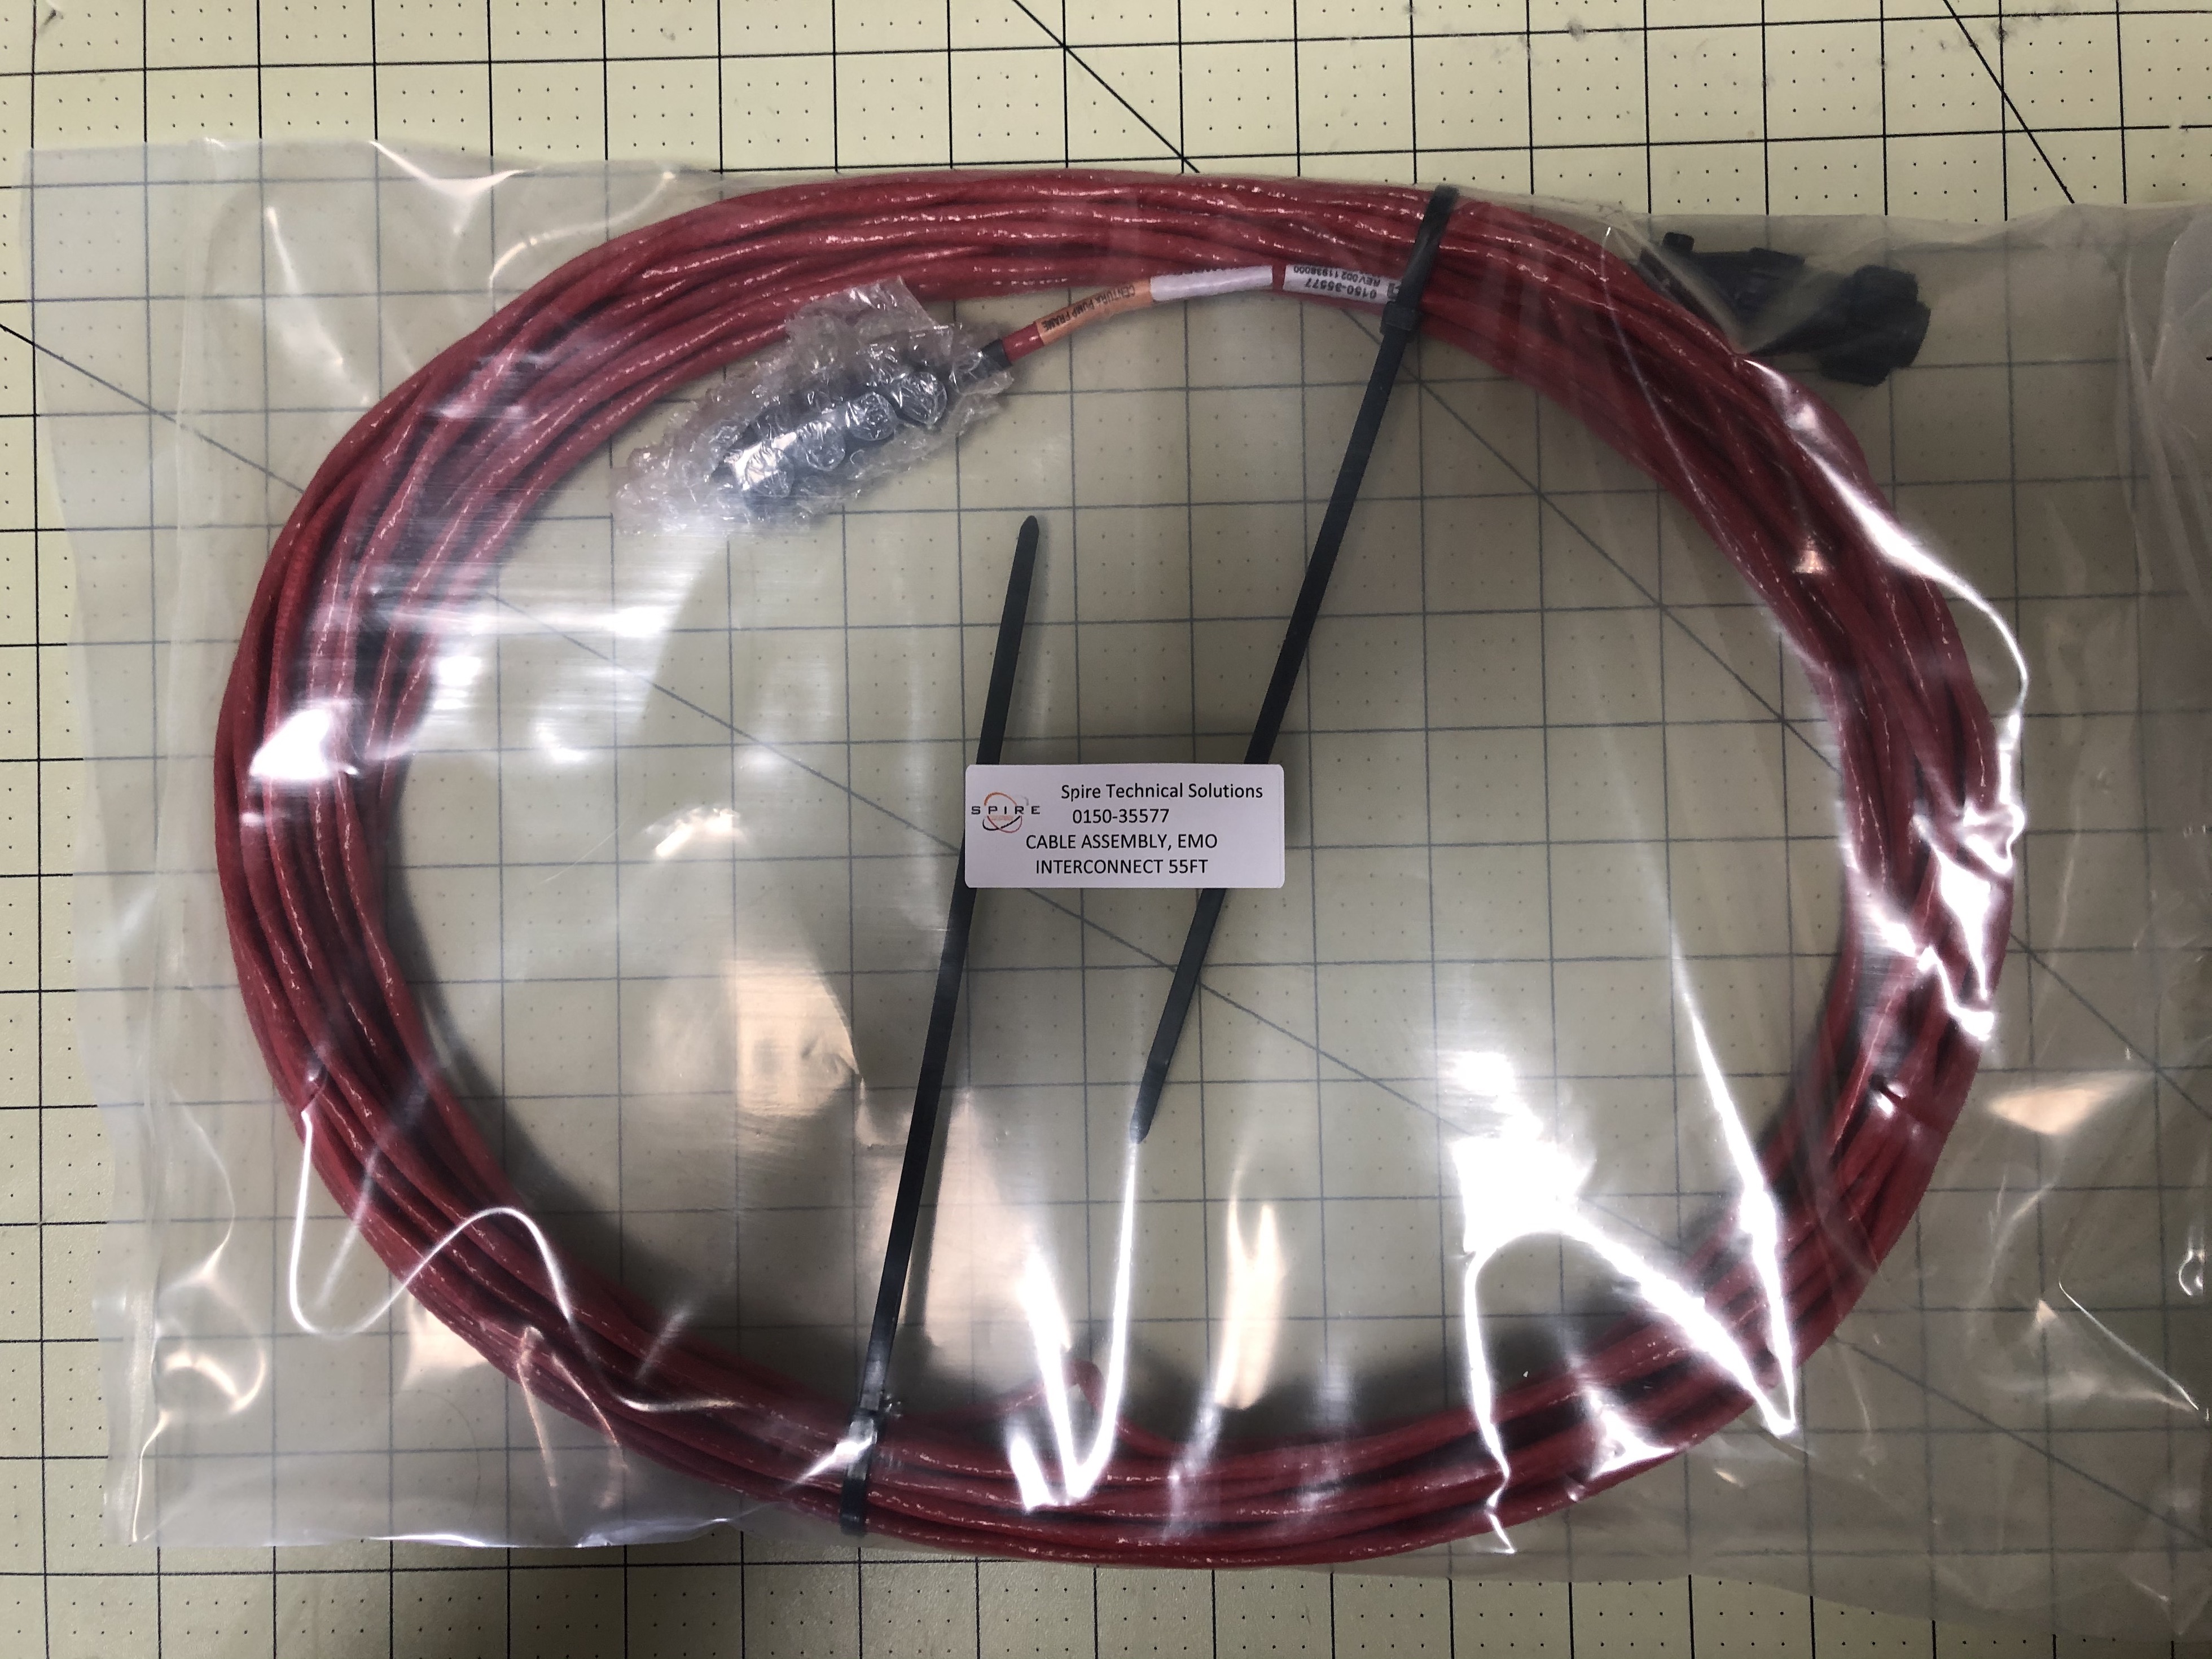 CABLE ASSEMBLY, EMO INTERCONNECT 55FT